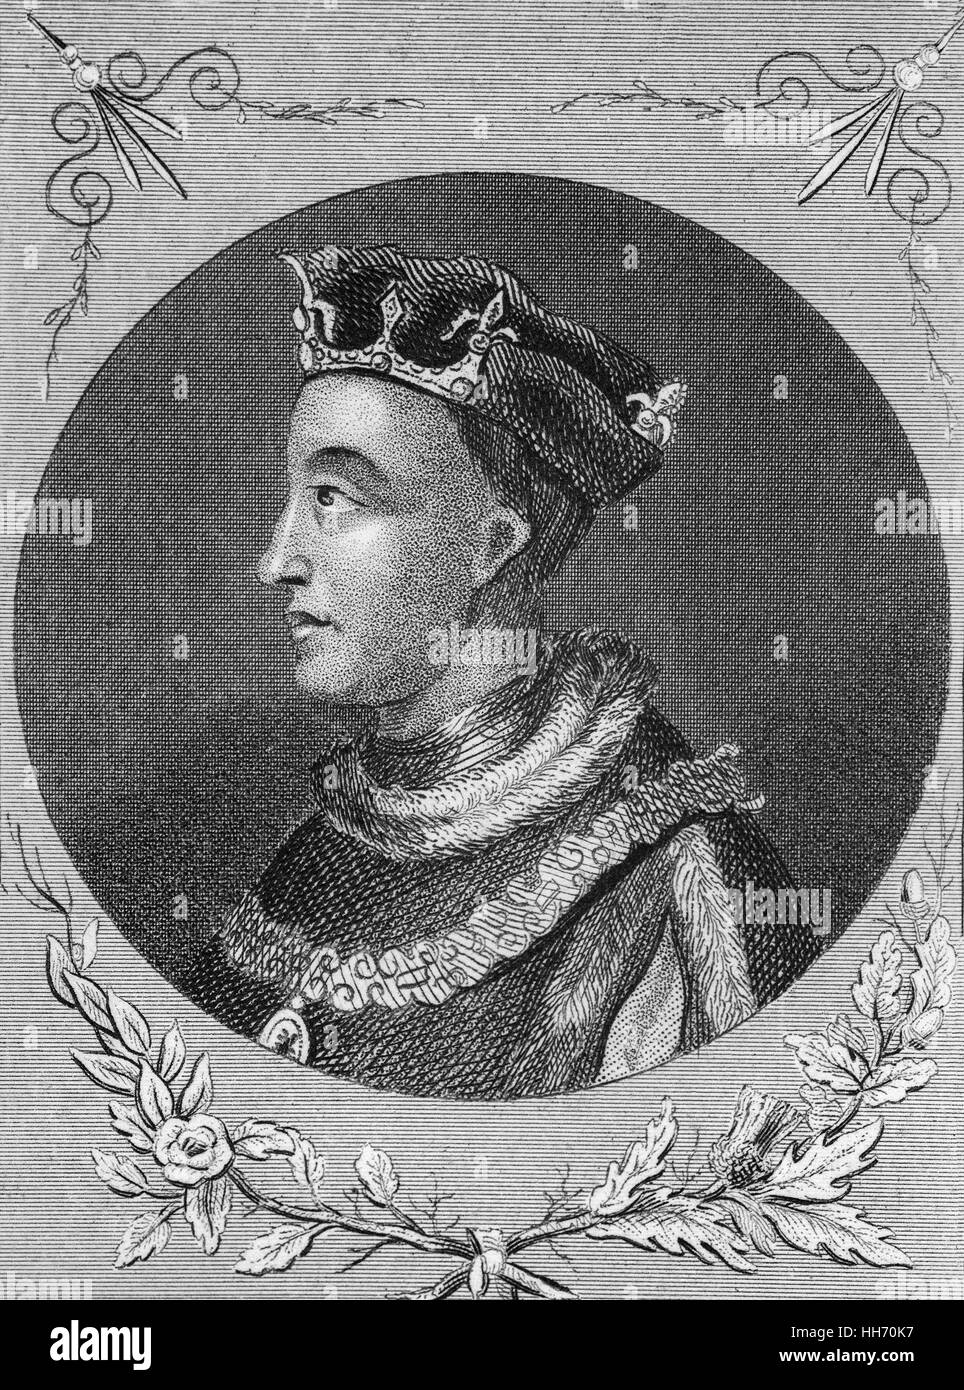 Henry V (1386 – 1422) was King of England from 1413 until his death at the age of 36 in 1422. He was the second English monarch who came from the House of Lancaster. Stock Photo